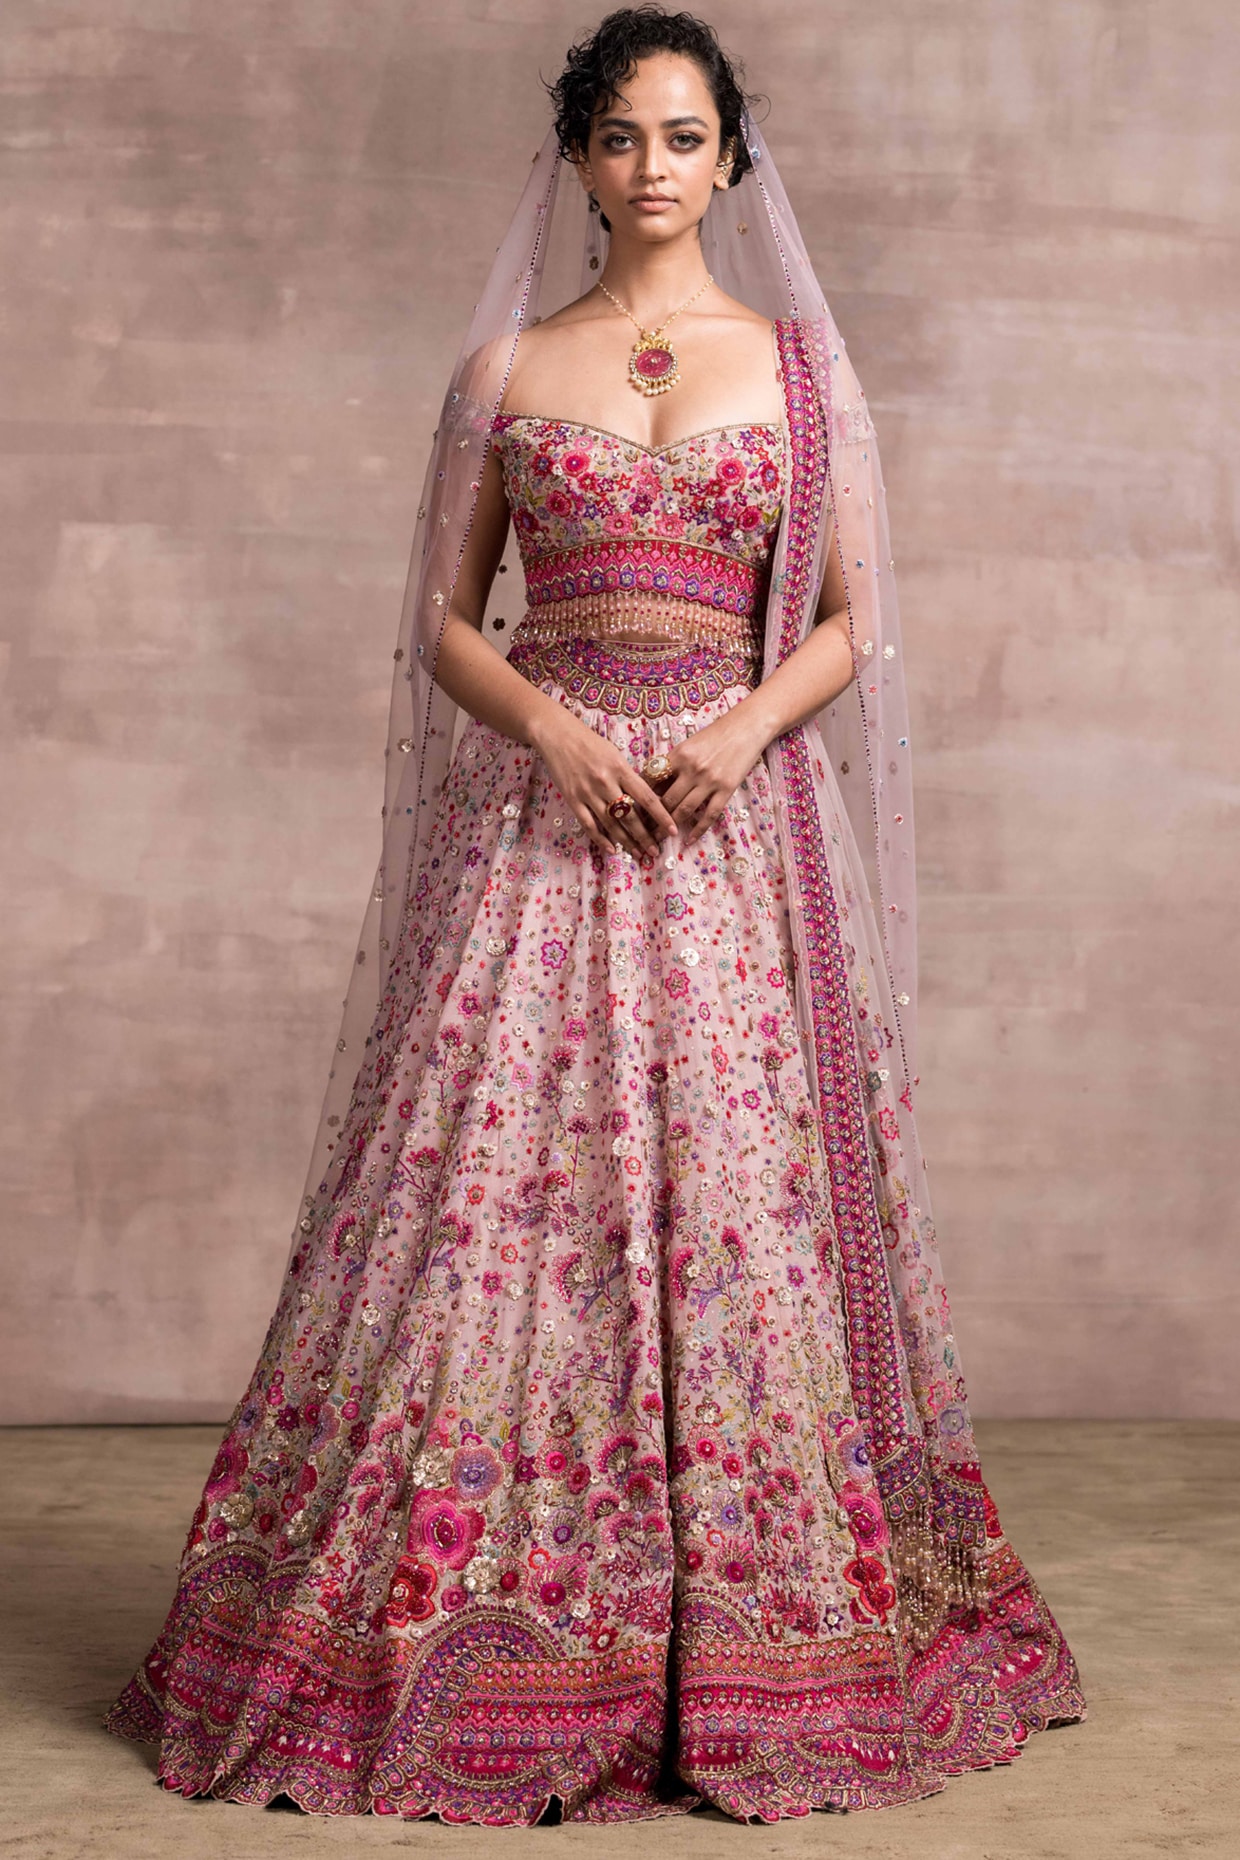 tarun-tahiliani-couture-collection-icw-2016-dresses-13-bridal-grooms-lehenga-outfit  – INDIAN BLING WEDDINGS